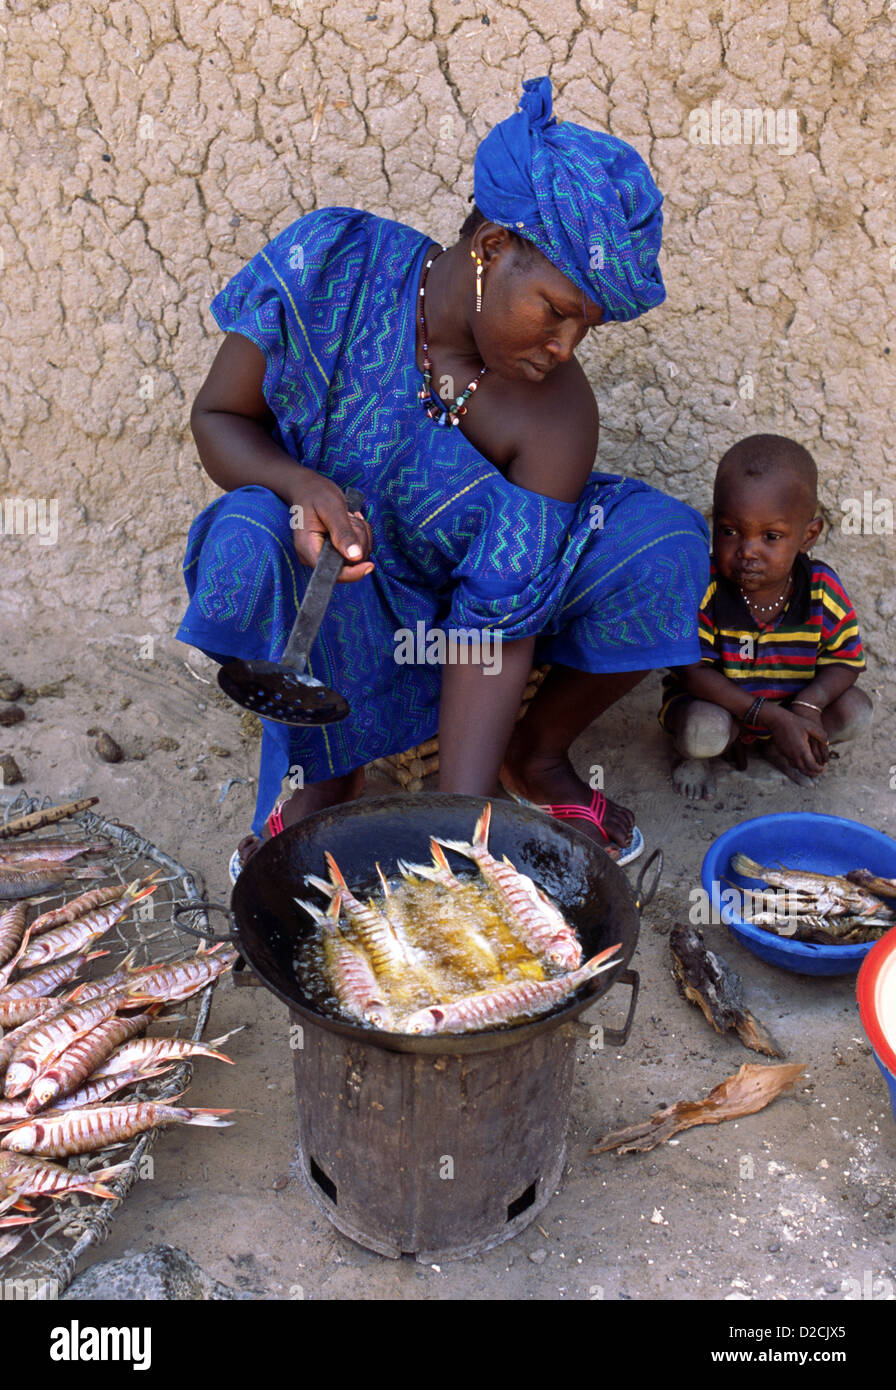 A woman selling freshly cooked fish at a market in Mali, West Africa. She is wearing a boubou - traditional robe dress. Stock Photo